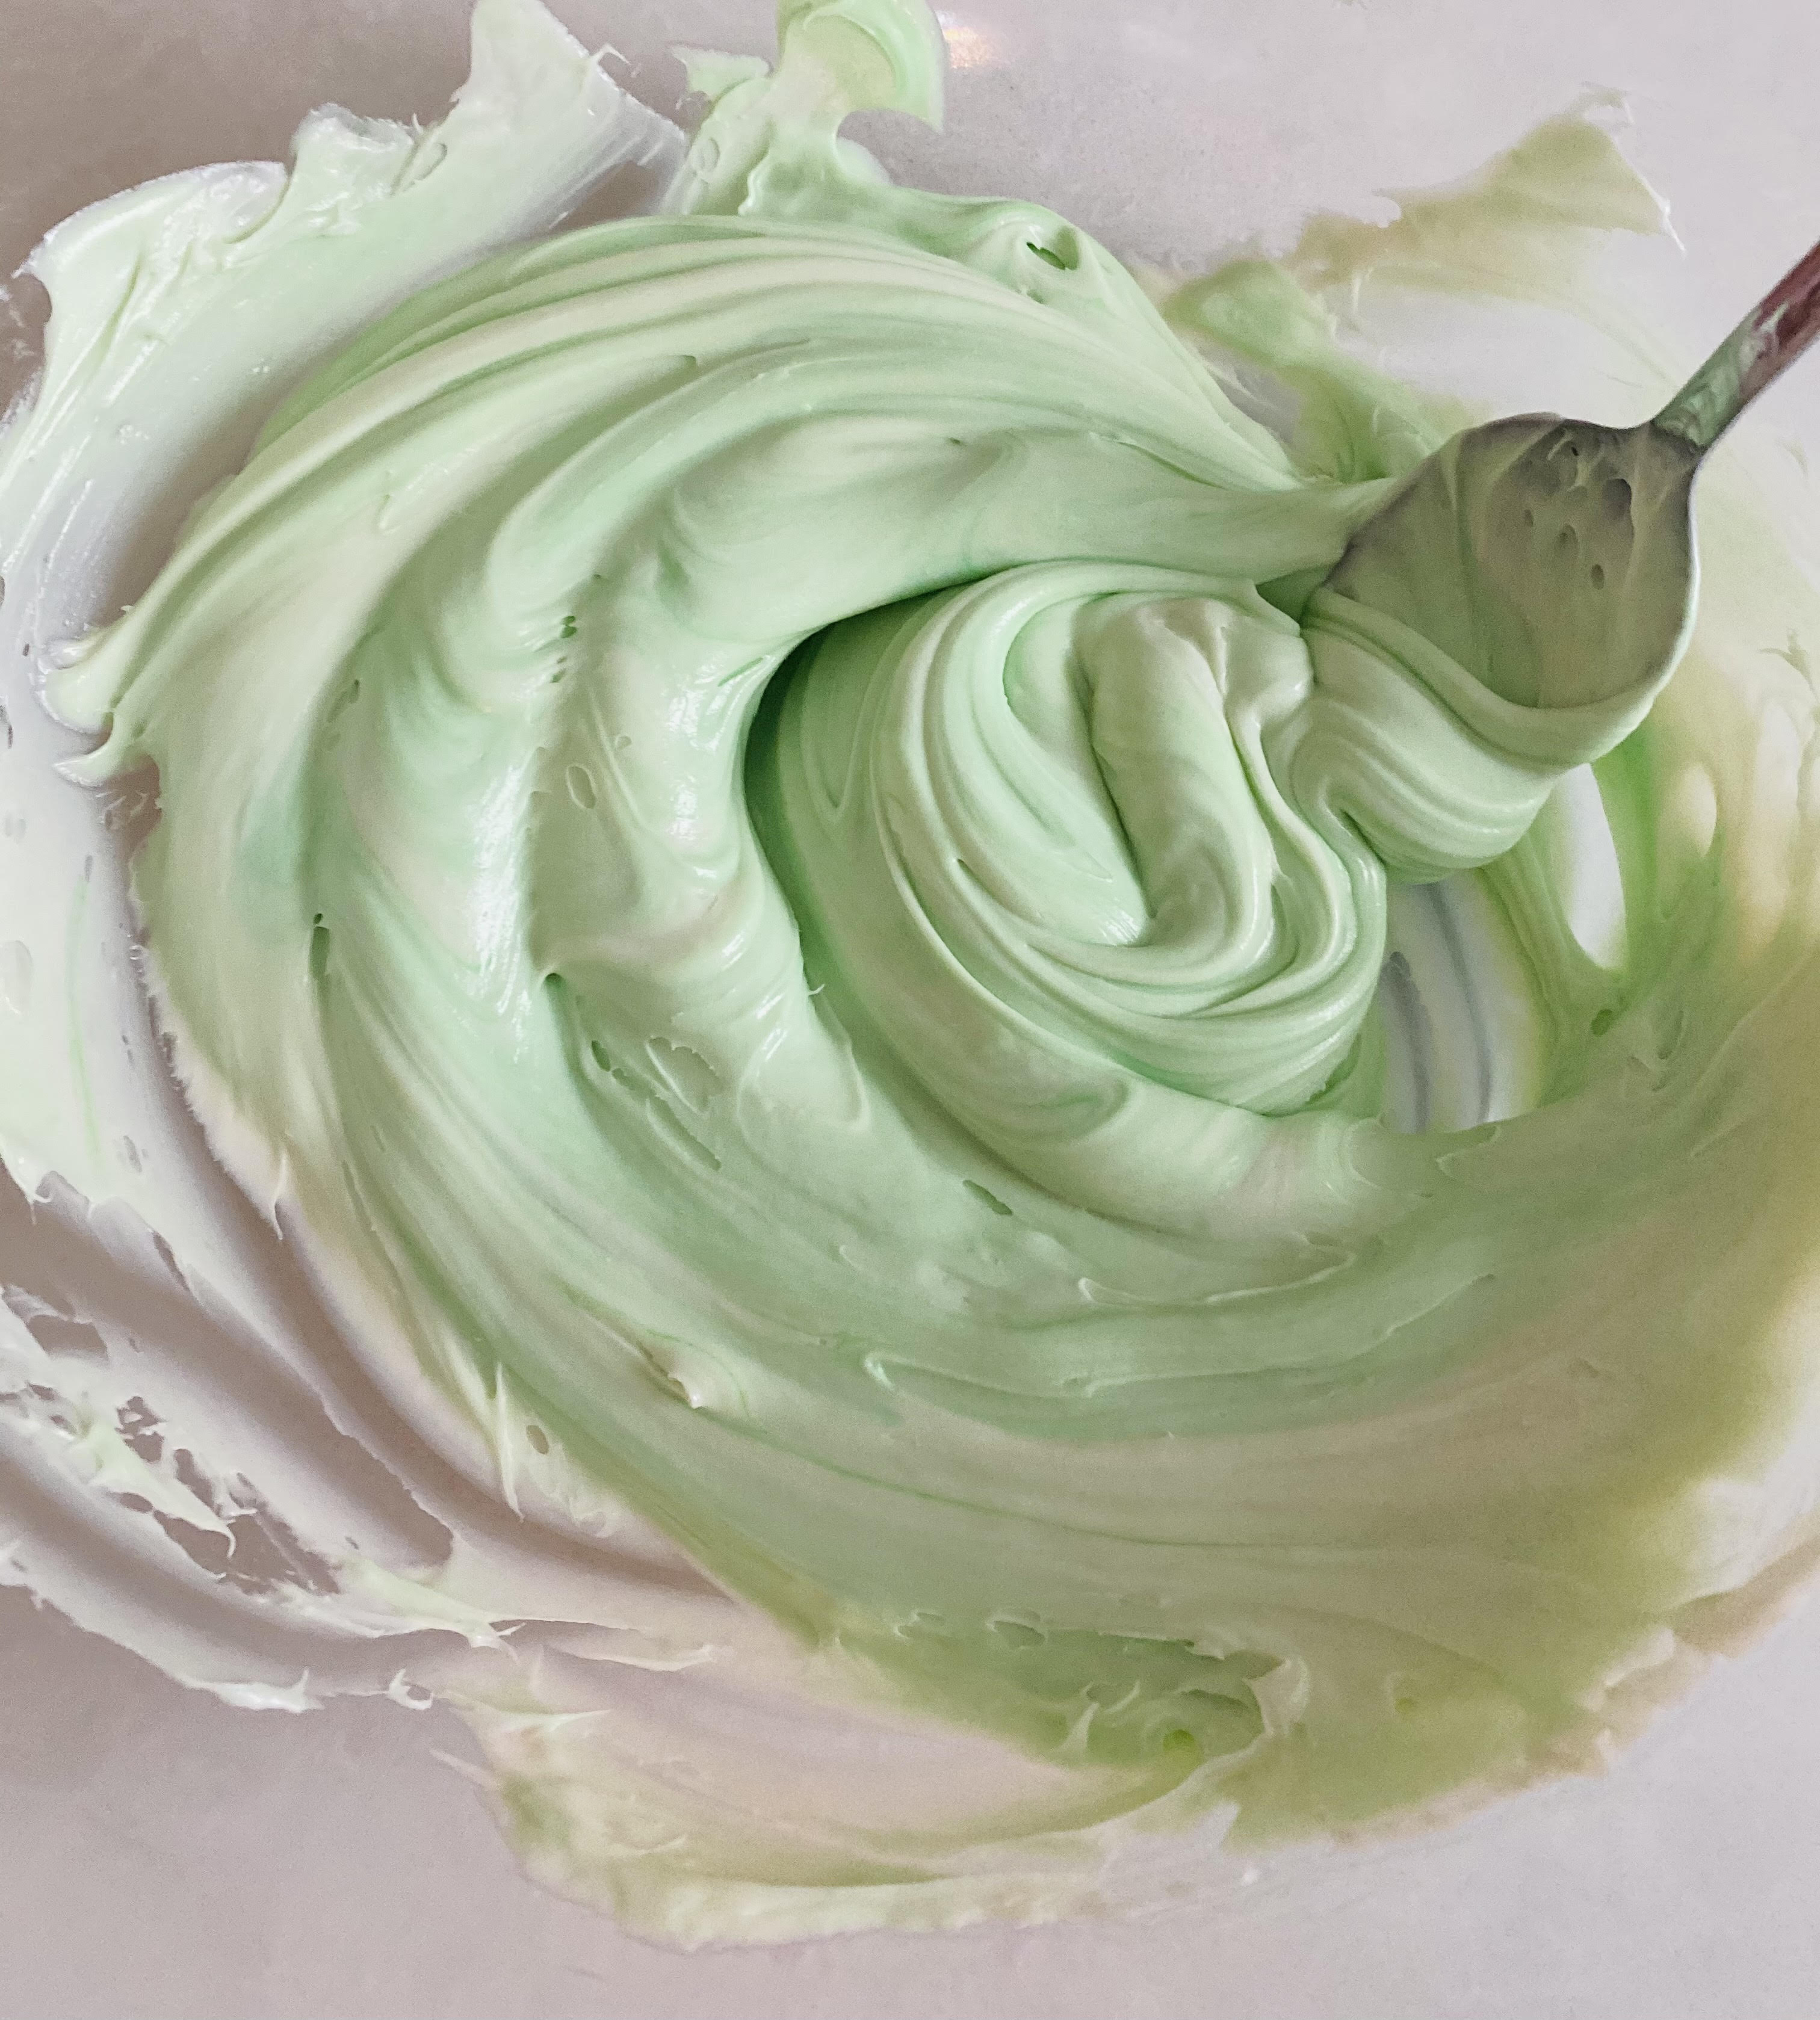 mix the food coloring into vanilla frosting for desired color for the edible playdoh. We are making "ice cream" edible playdoh so this is "mint chocolate chip" 